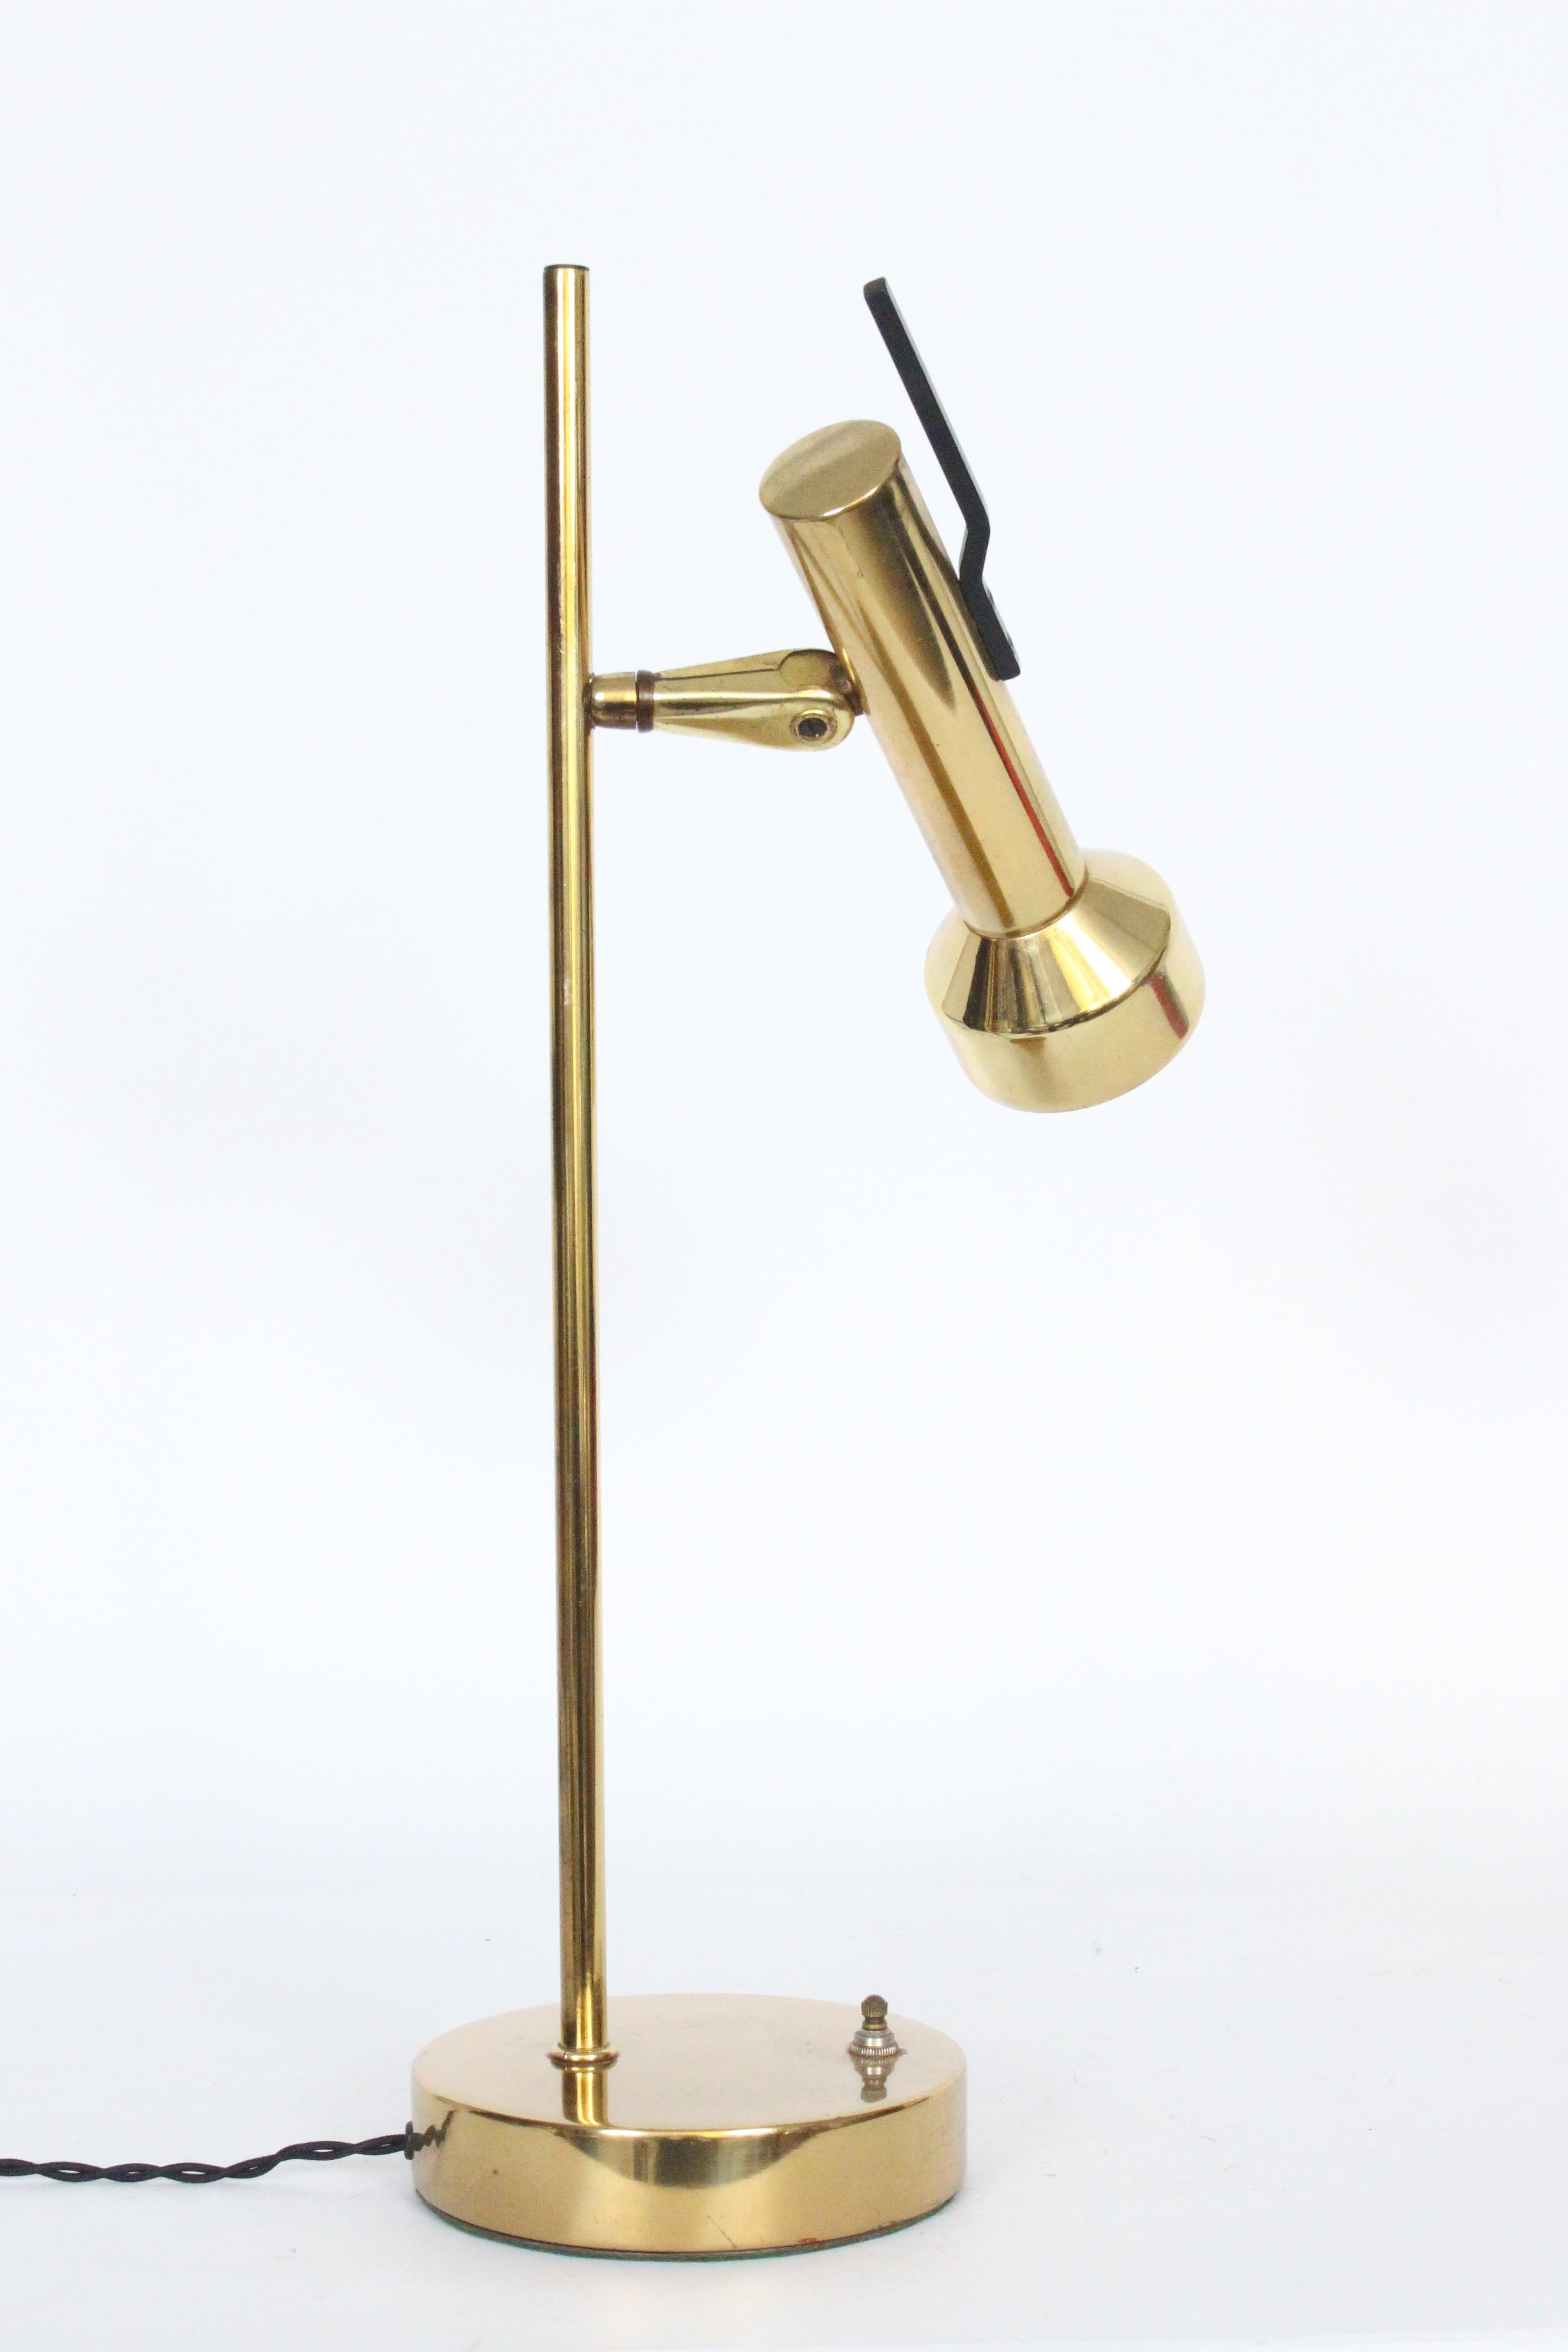 Gerald Thurston for Lightolier Style Adjustable Shaded Brass Desk Lamp, 1960s In Good Condition For Sale In Bainbridge, NY